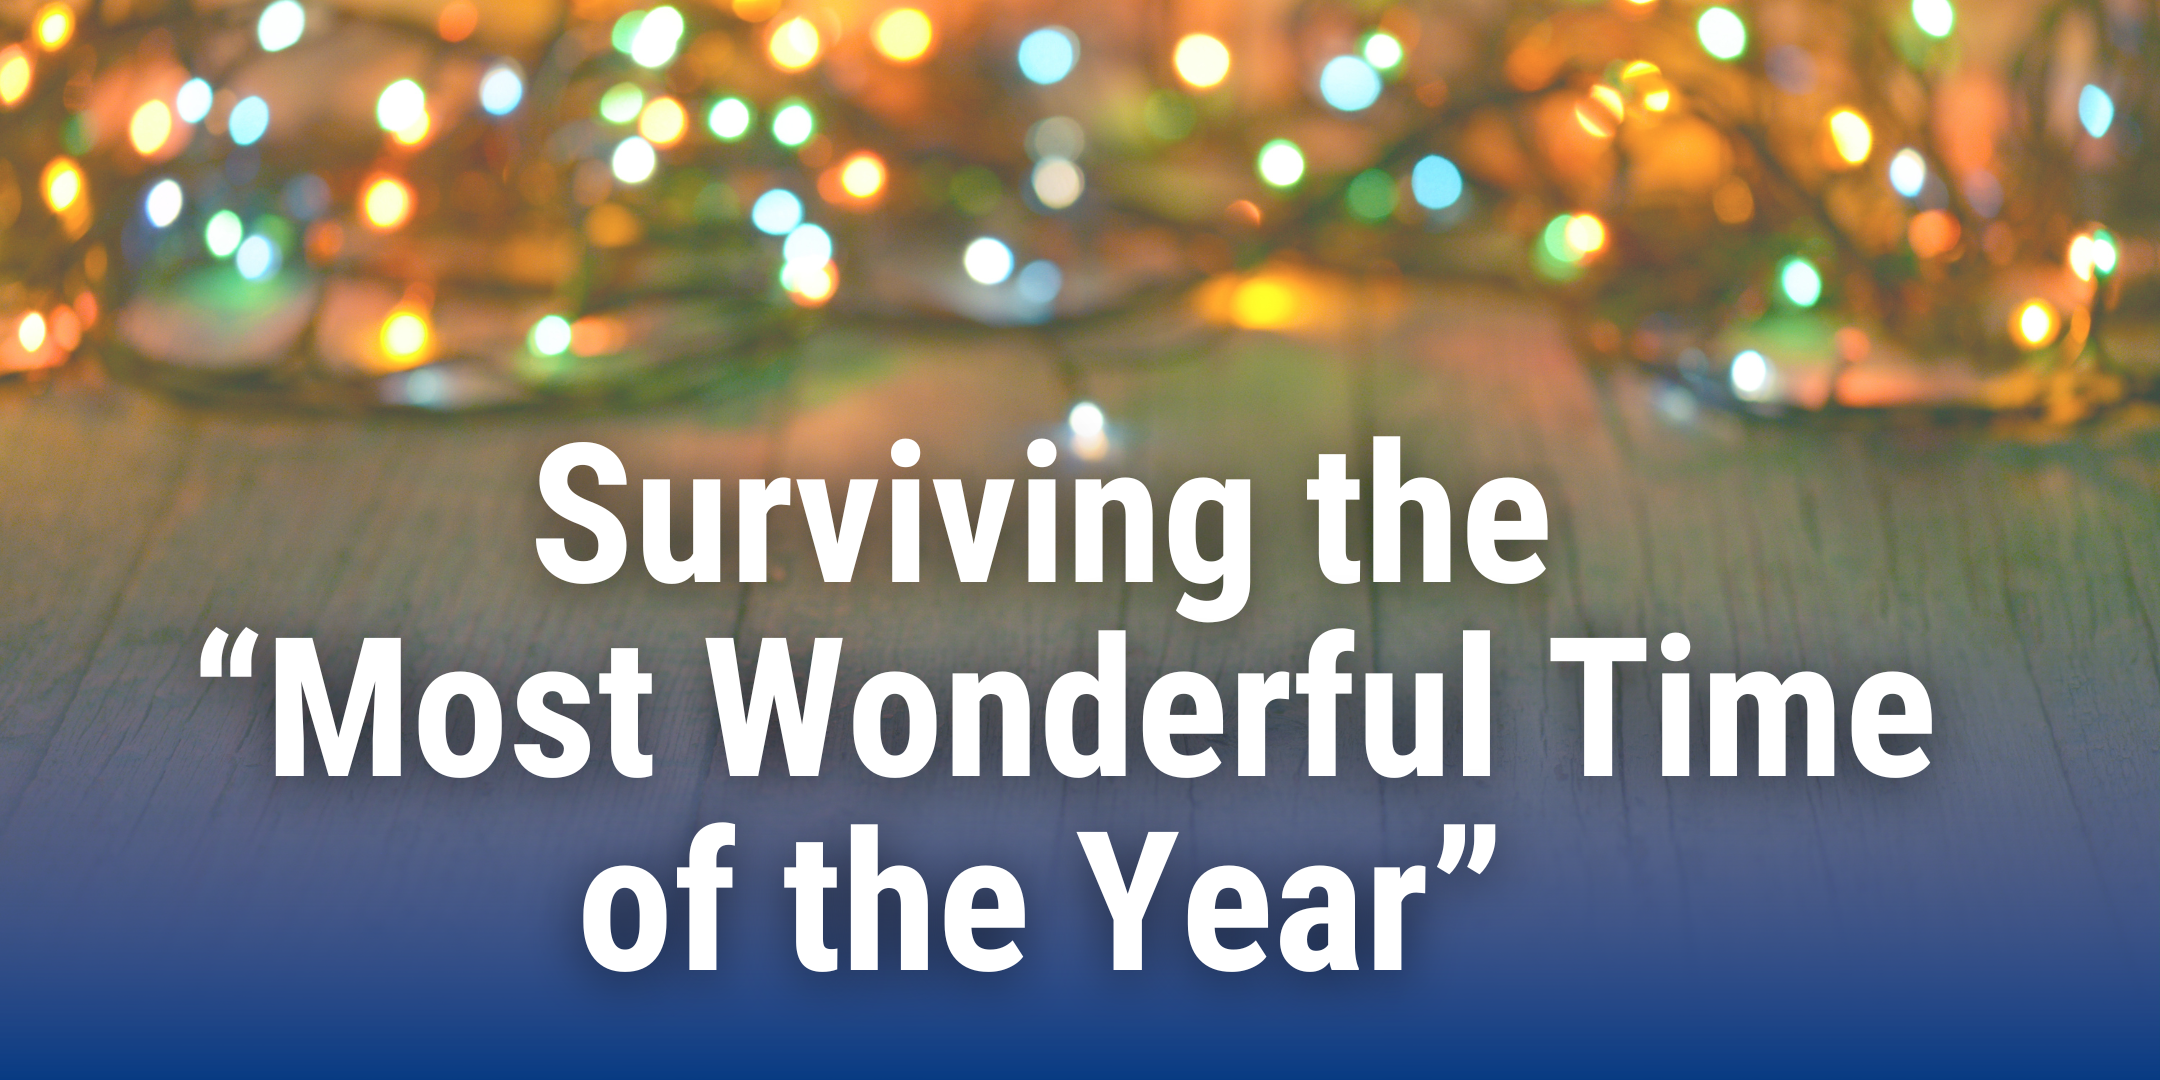 Banner image of illuminated holiday lights, displaying the blog title: Surviving the “Most Wonderful Time of the Year”